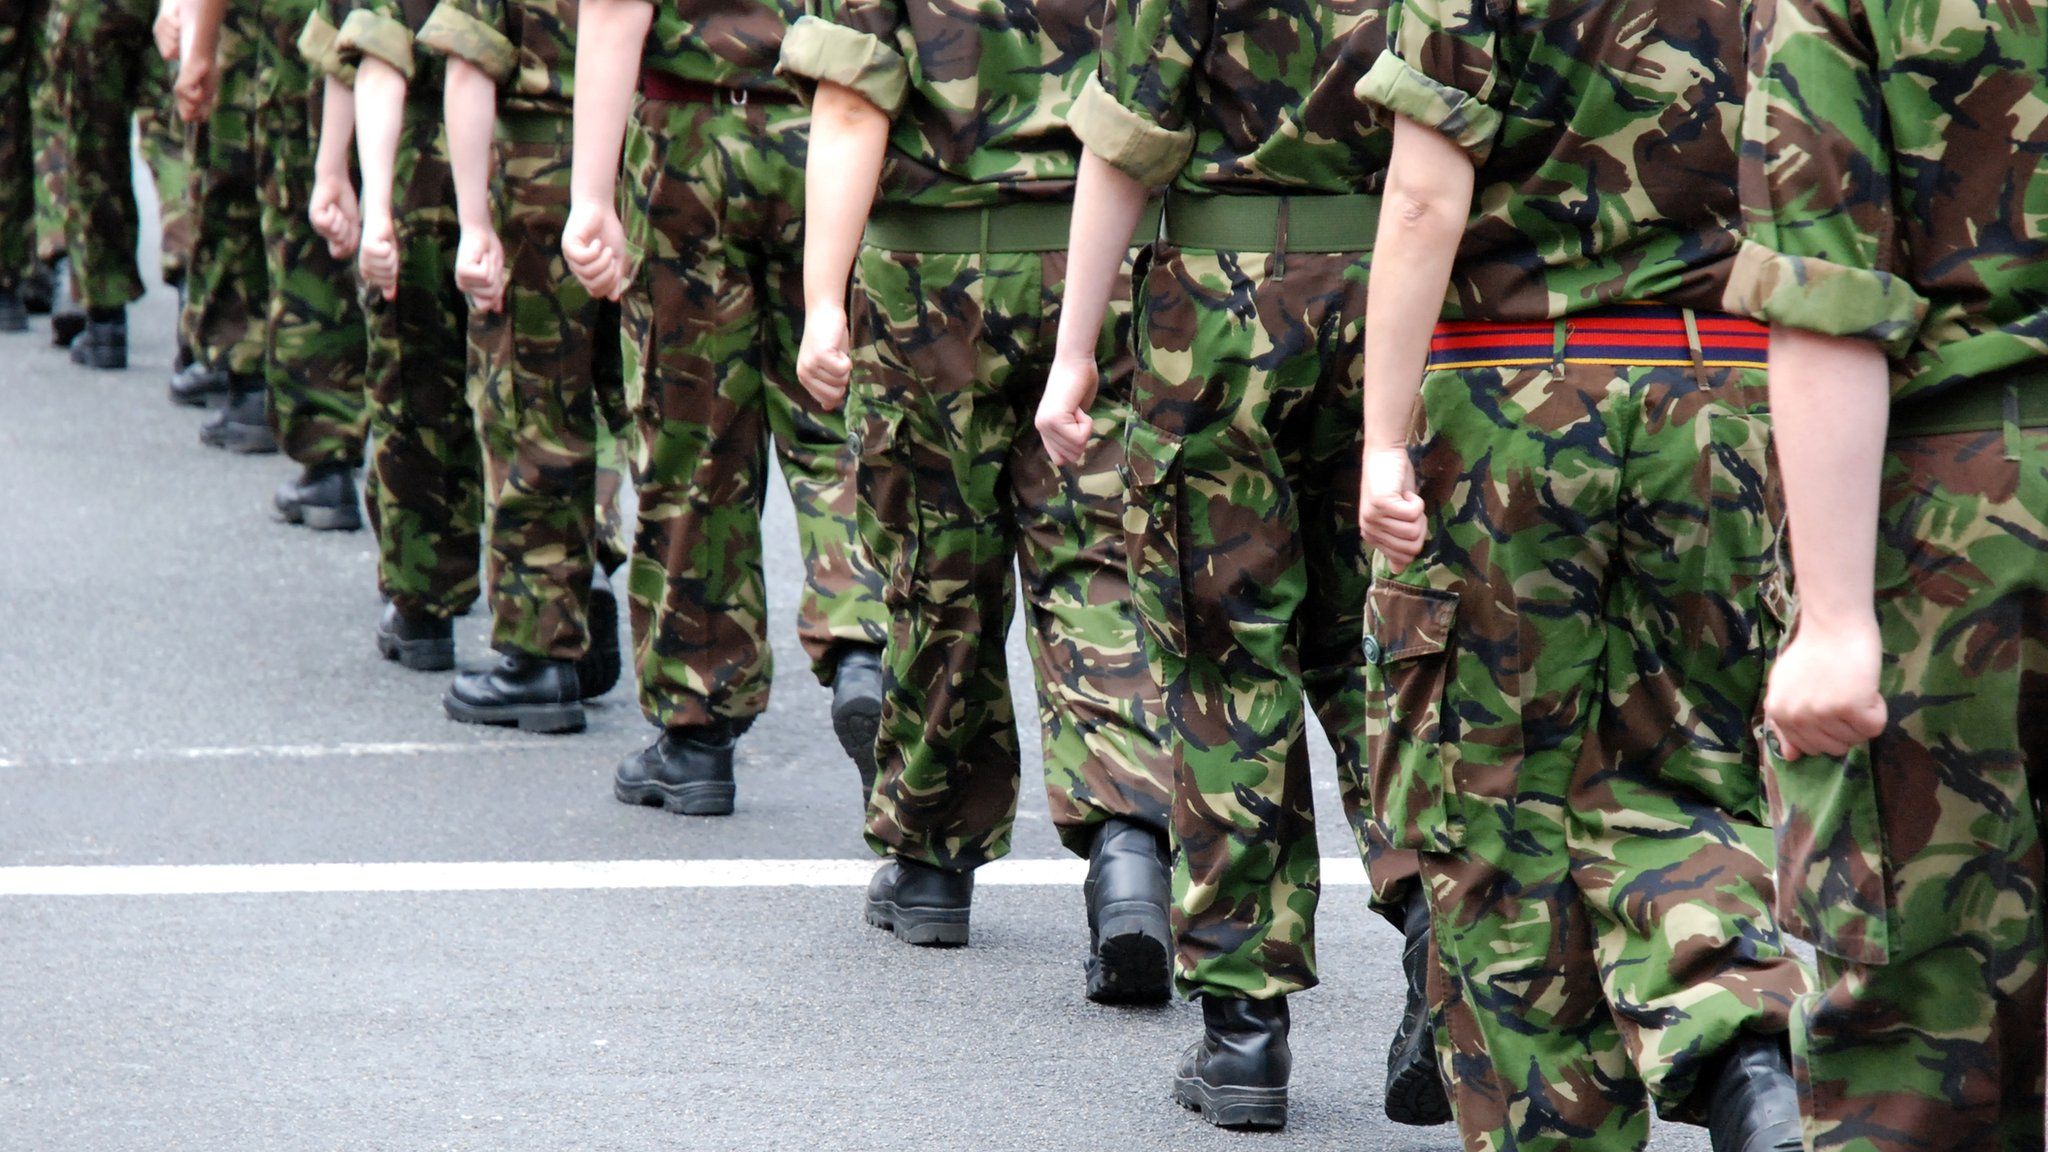 Soldiers marching - stock photo